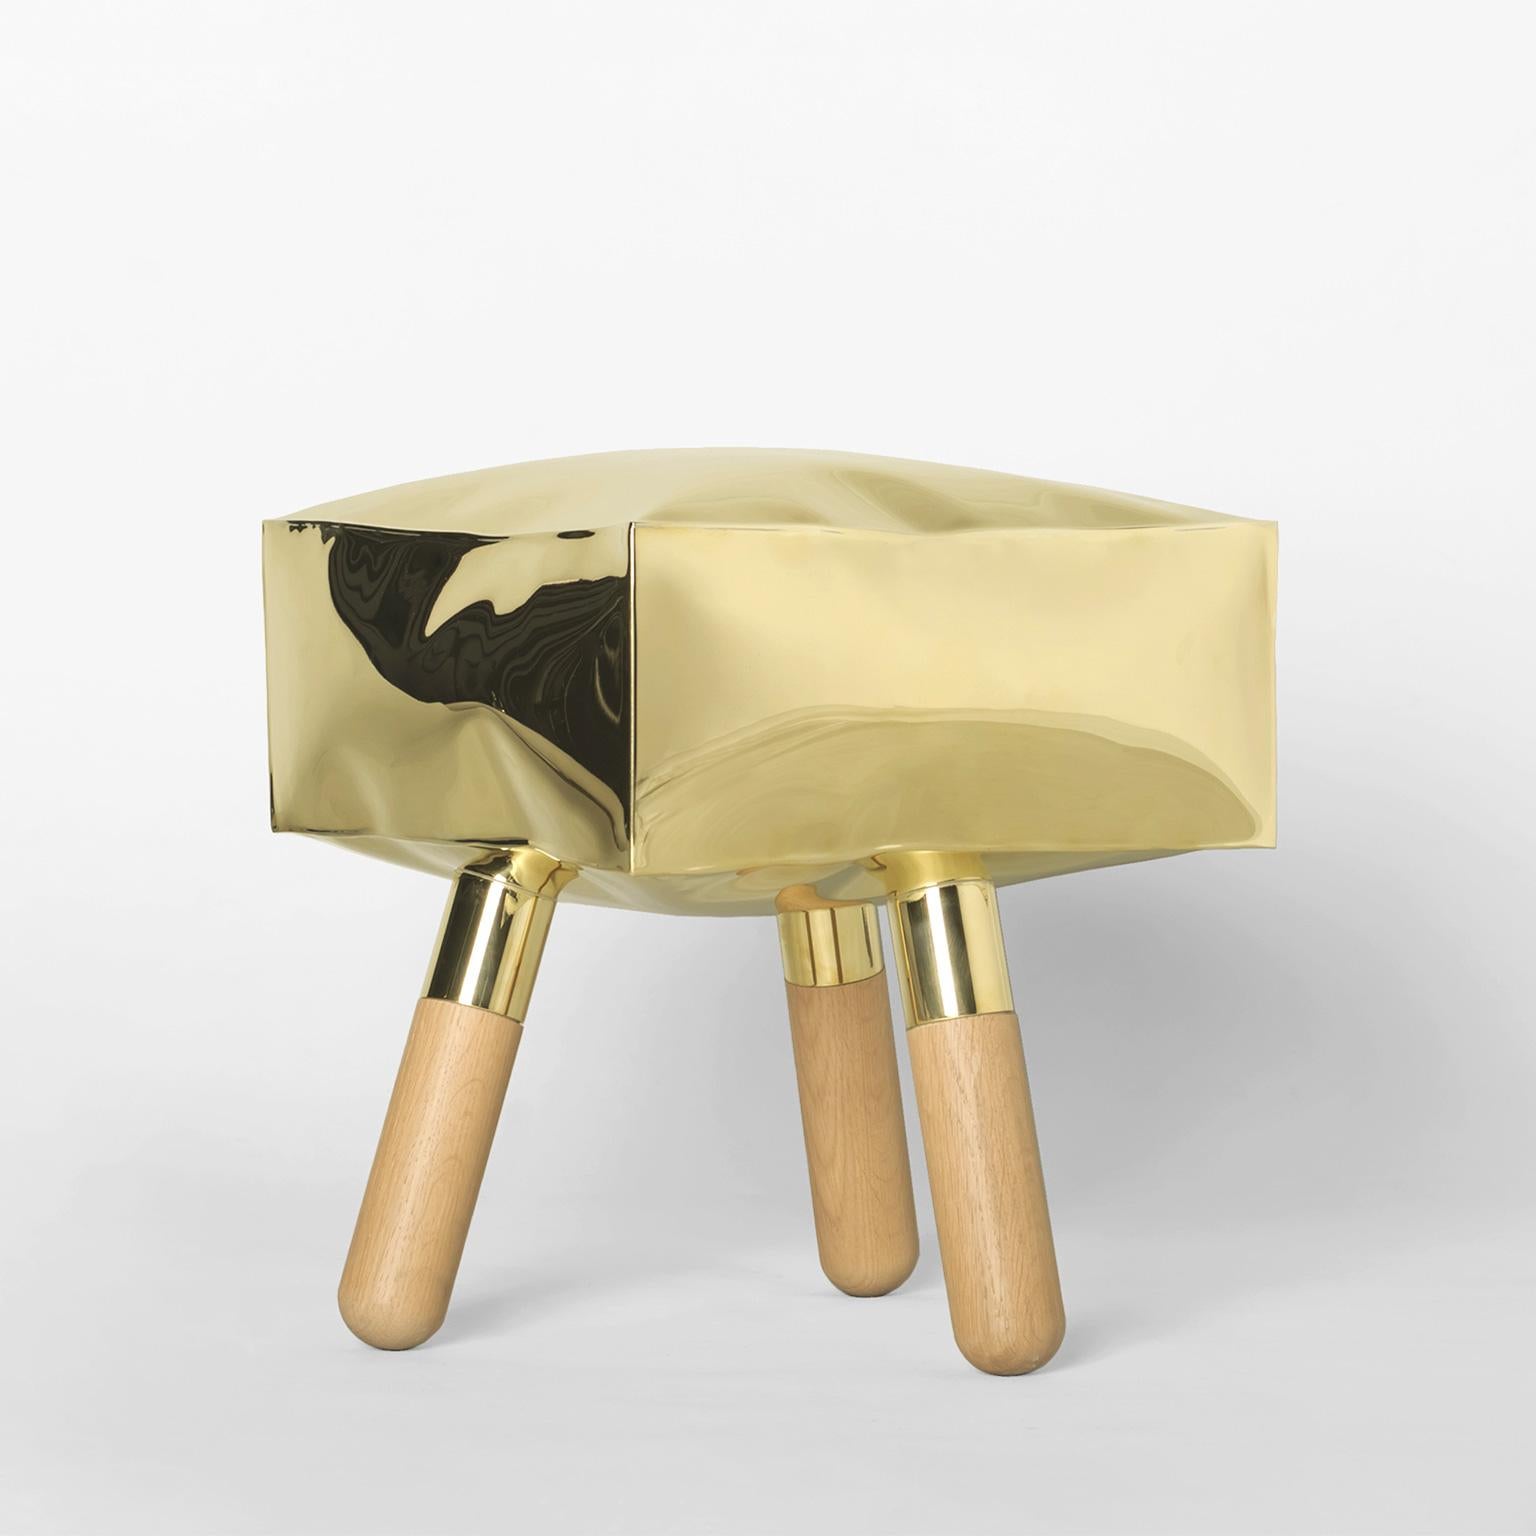 Polished Contemporary Limited Edition Wood Brass Stool, Icenine V1 by Edizione Limitata